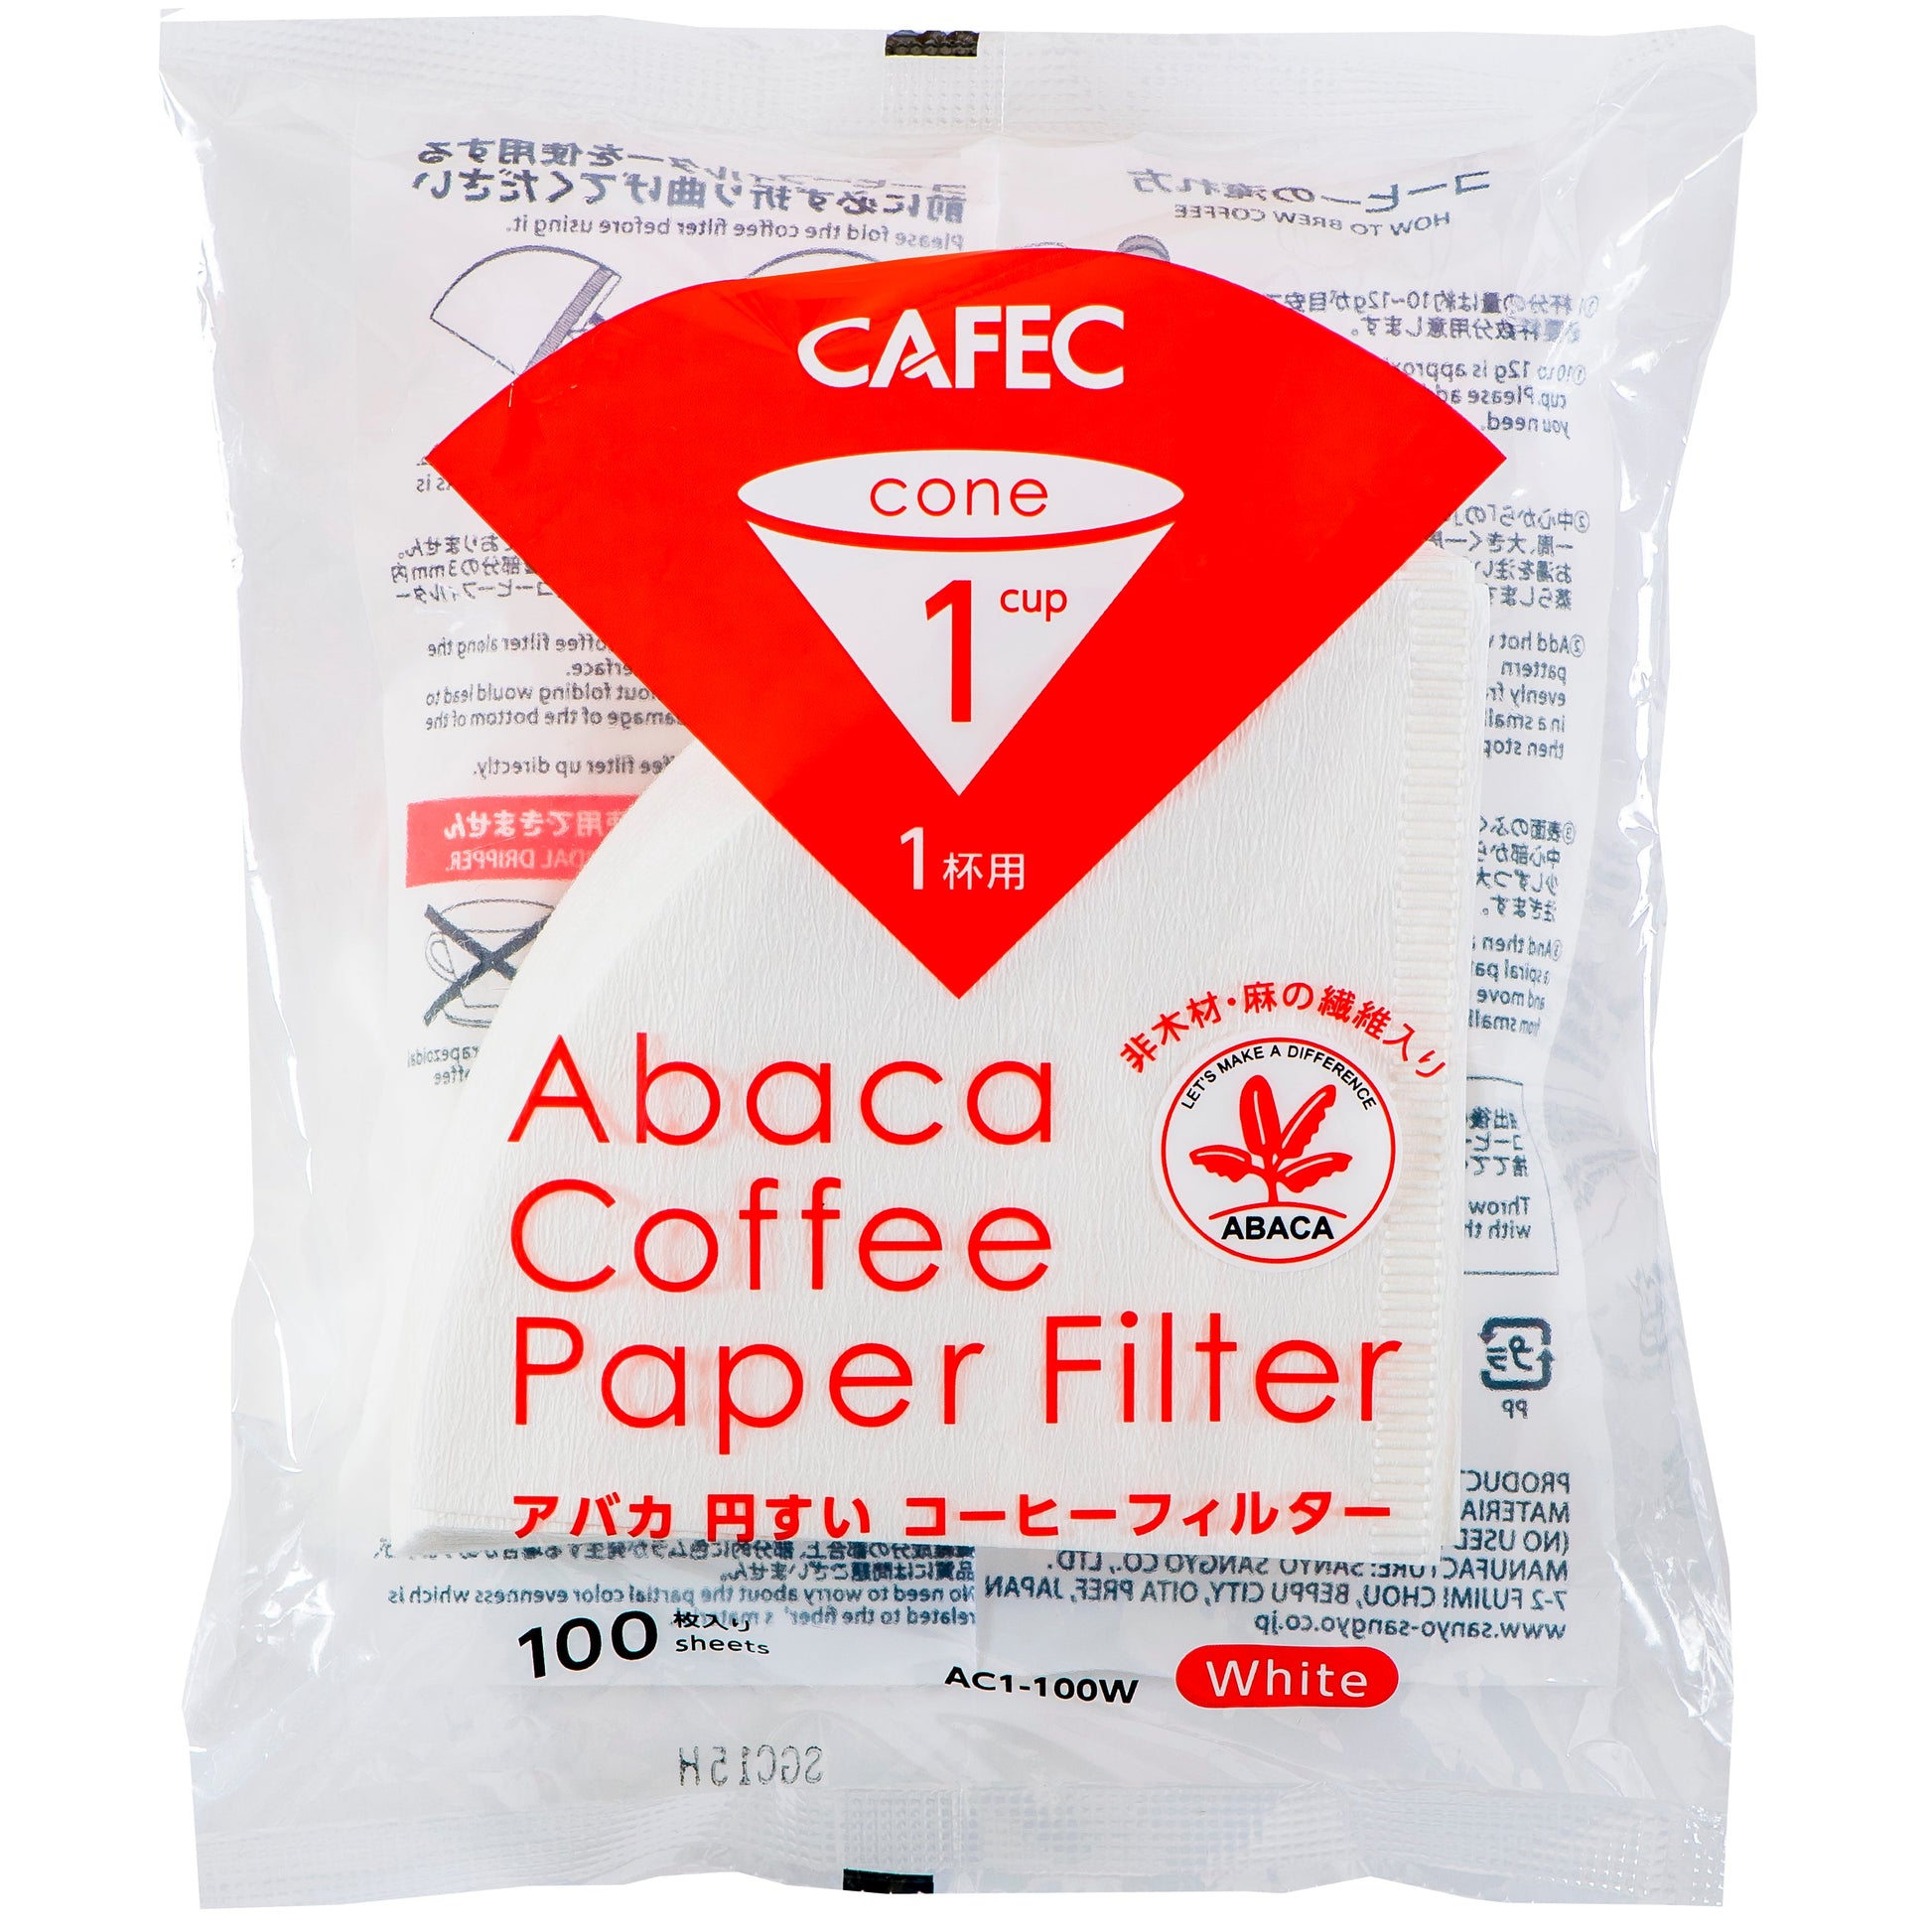 Abaca Coffee Paper Filter in Kuwait